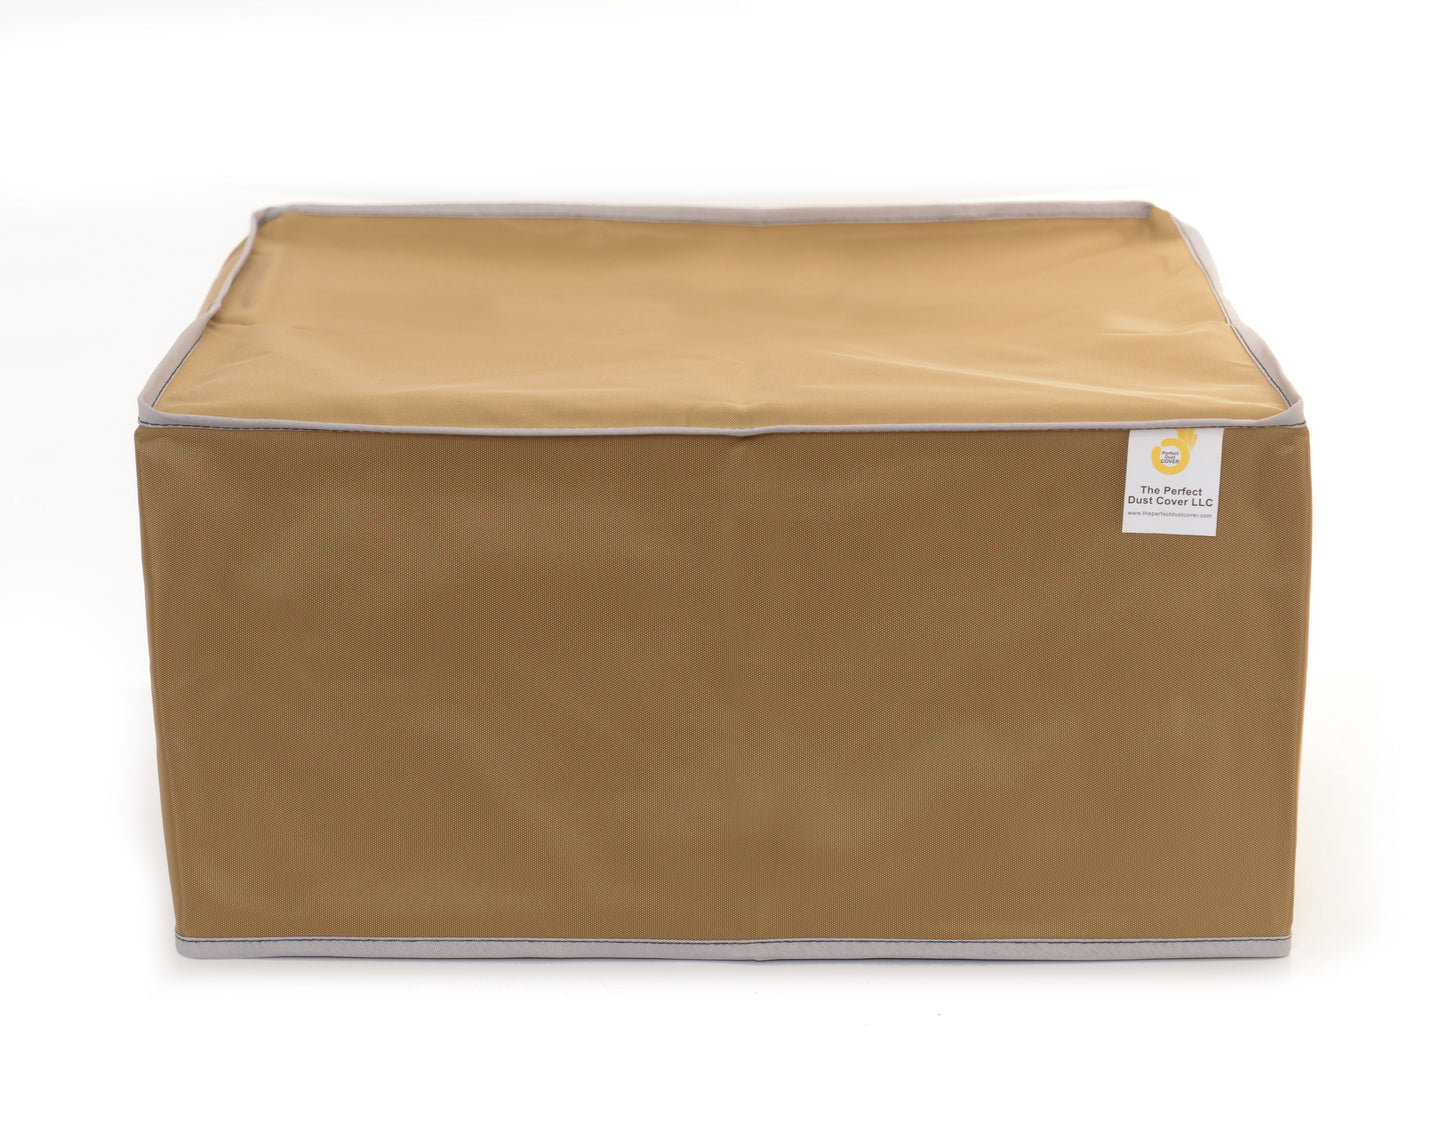 The Perfect Dust Cover, Tan Nylon Cover Compatible with Brother MFC-J1205W INKvestment Tank All-in-One Printer, Anti Static and Waterproof Dust Cover by The Perfect Dust Cover LLC